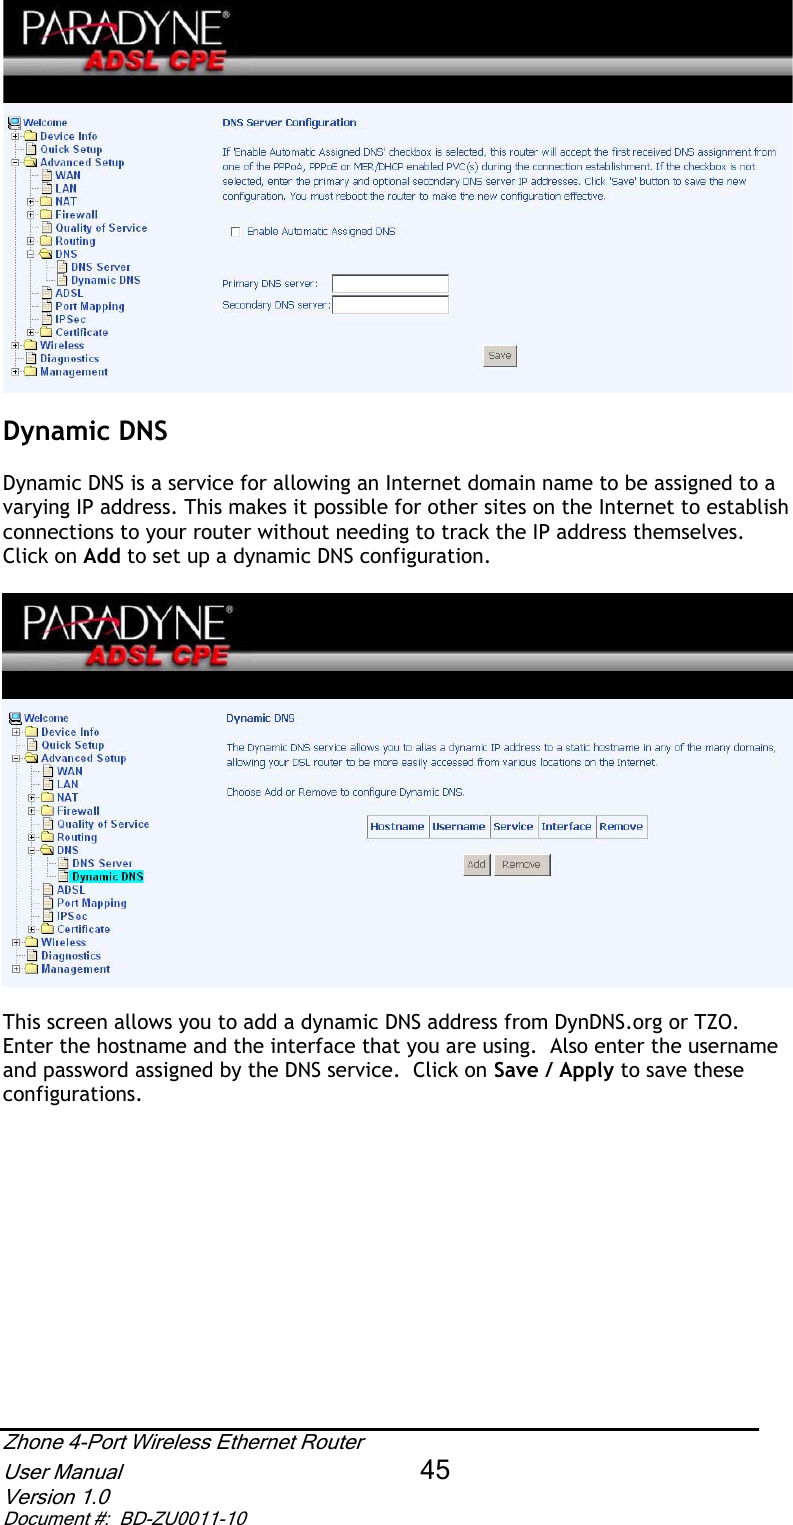 Dynamic DNS Dynamic DNS is a service for allowing an Internet domain name to be assigned to a varying IP address. This makes it possible for other sites on the Internet to establish connections to your router without needing to track the IP address themselves.  Click on Add to set up a dynamic DNS configuration. This screen allows you to add a dynamic DNS address from DynDNS.org or TZO.  Enter the hostname and the interface that you are using.  Also enter the username and password assigned by the DNS service.  Click on Save / Apply to save these configurations. Zhone 4-Port Wireless Ethernet Router User Manual 45Version 1.0 Document #:  BD-ZU0011-10